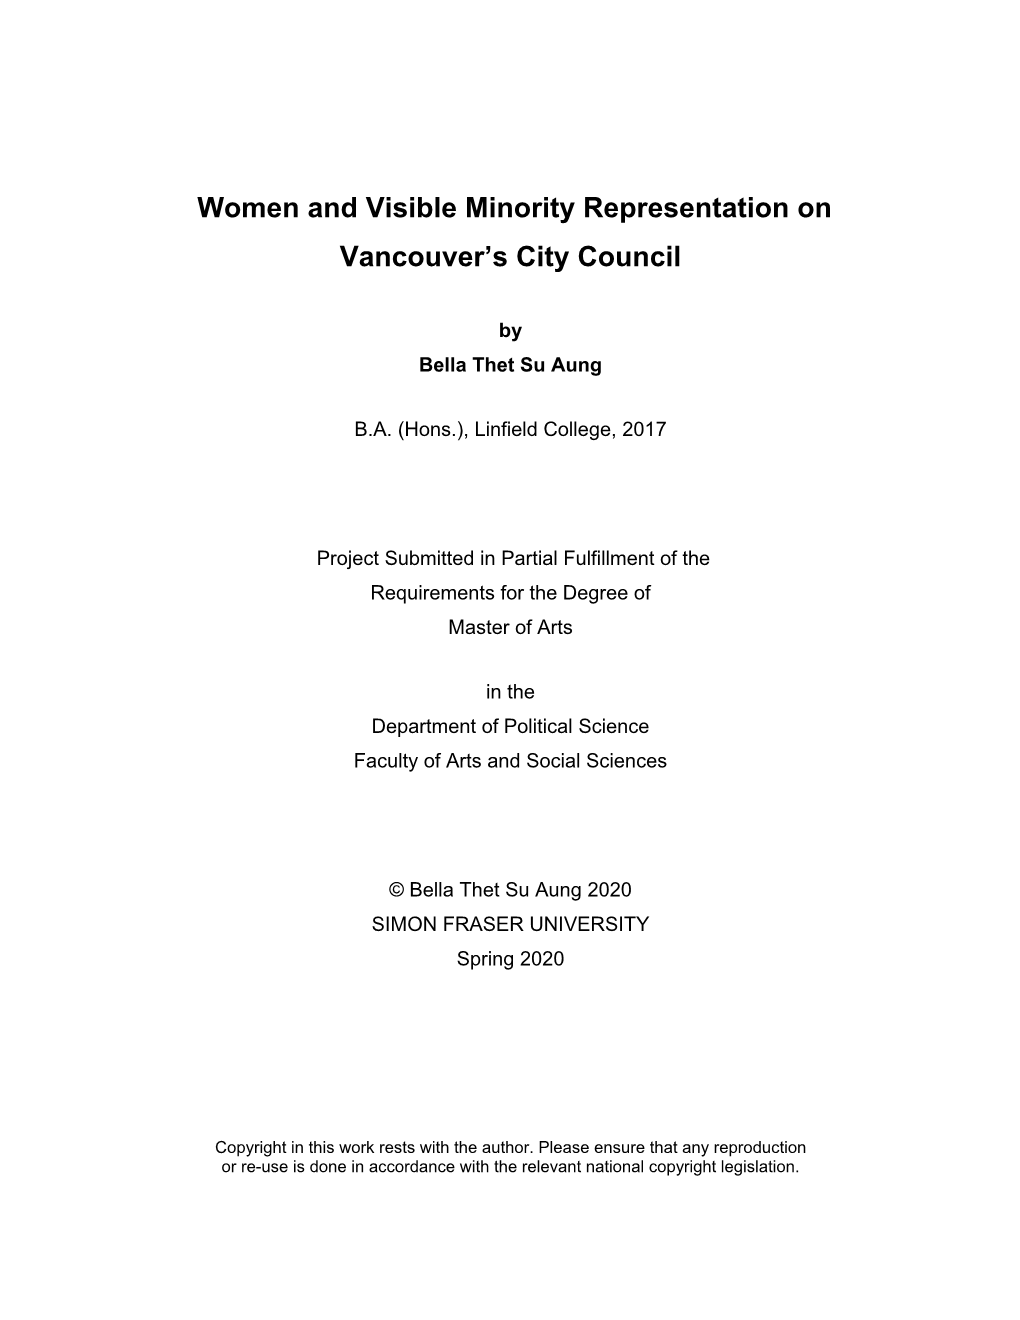 Women and Visible Minority Representation on Vancouver's City